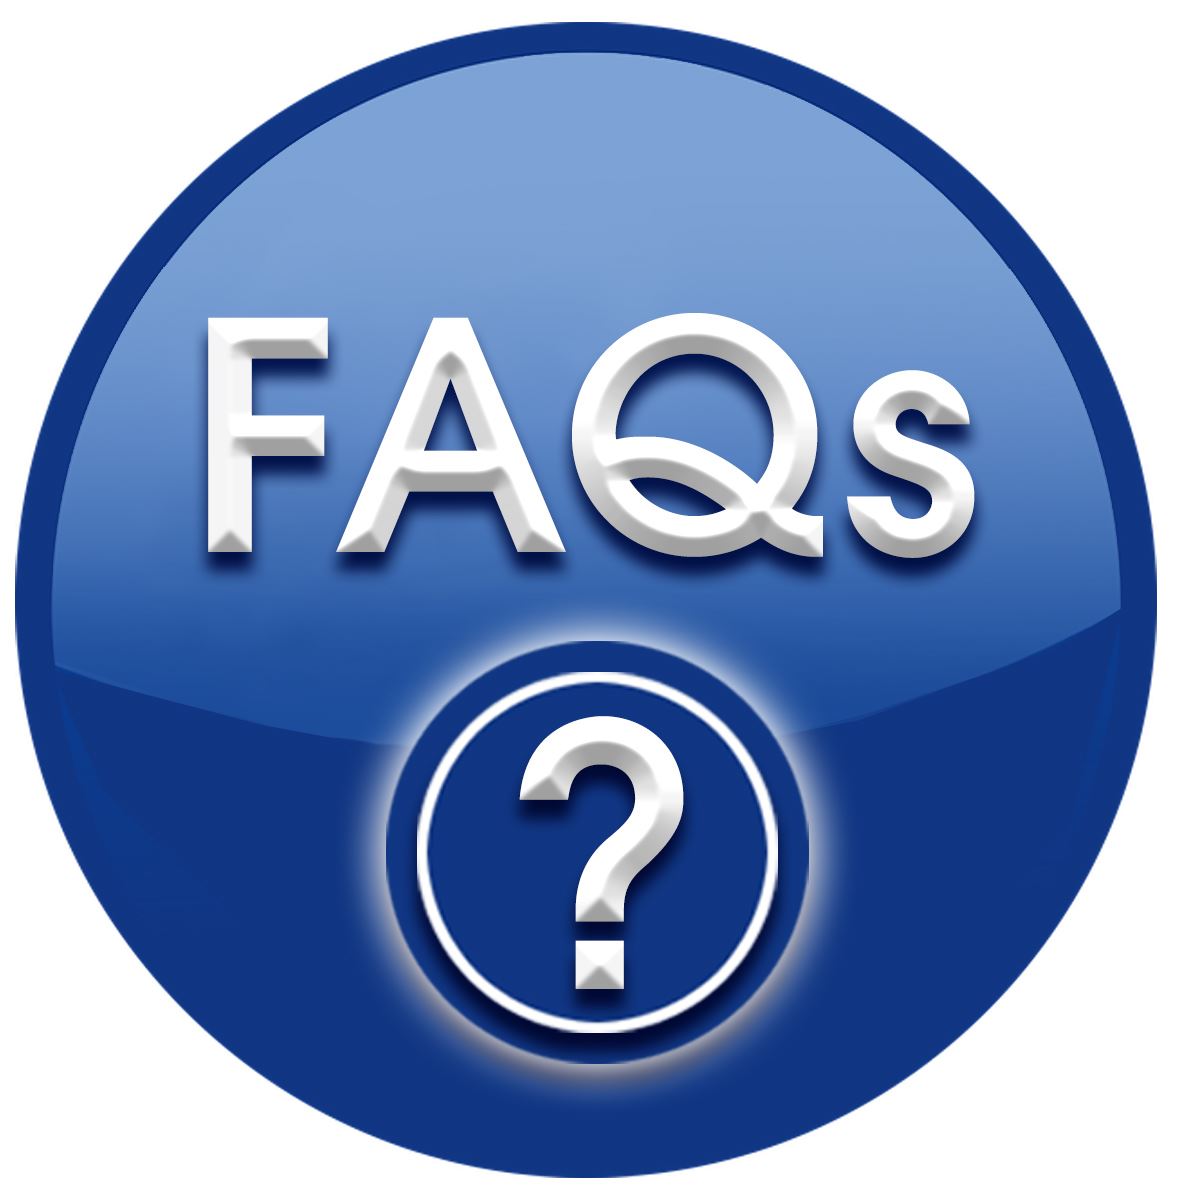 FAQs Icon for Frequently Asked Questions